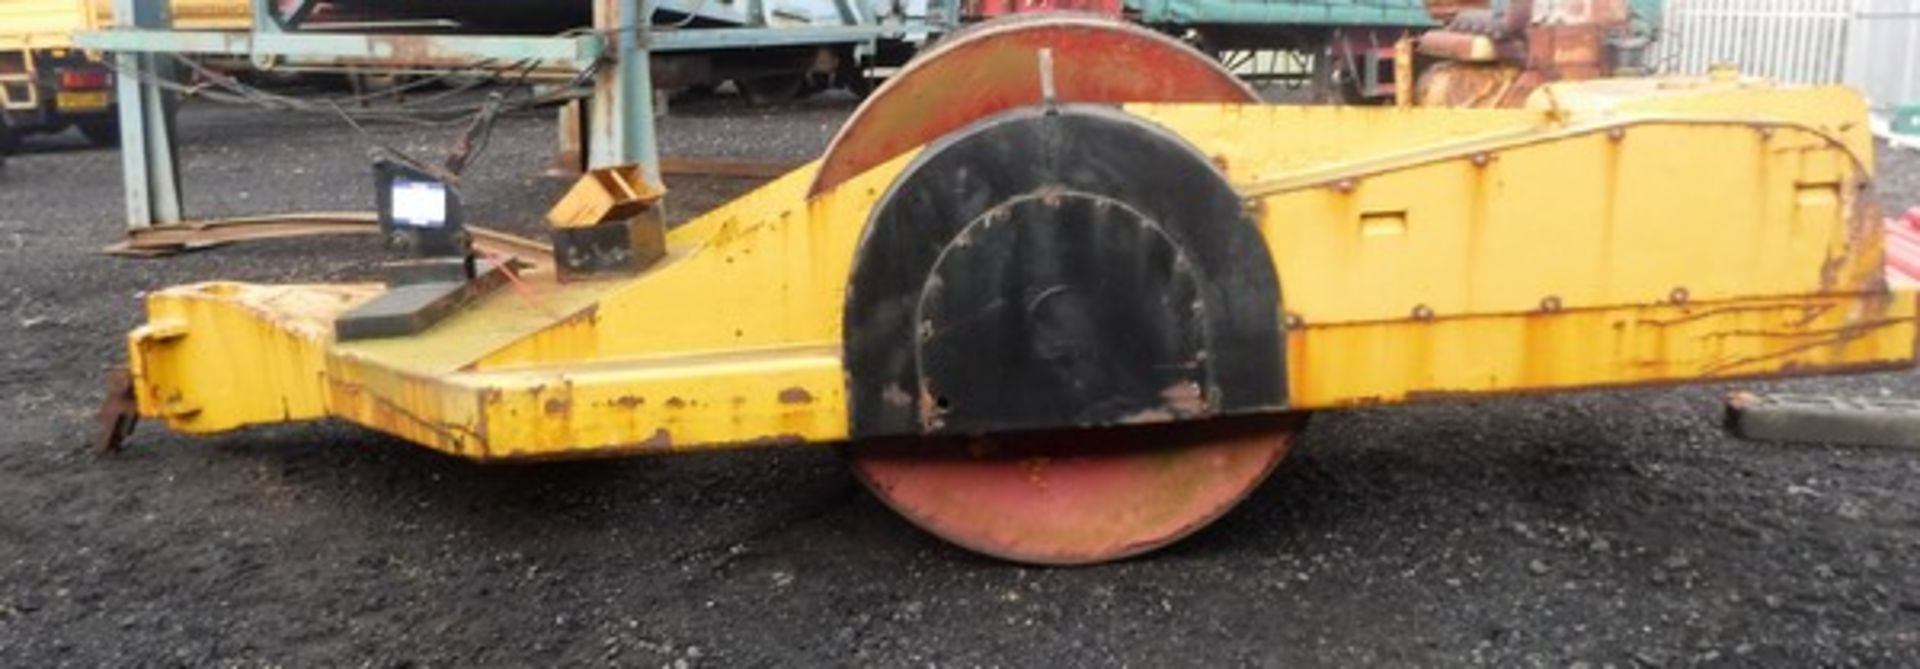 COMPACTOR ROLLER HEAVY TOWABLE WITH ENGINE ONREAR, S/N - 72161618B - Image 2 of 6